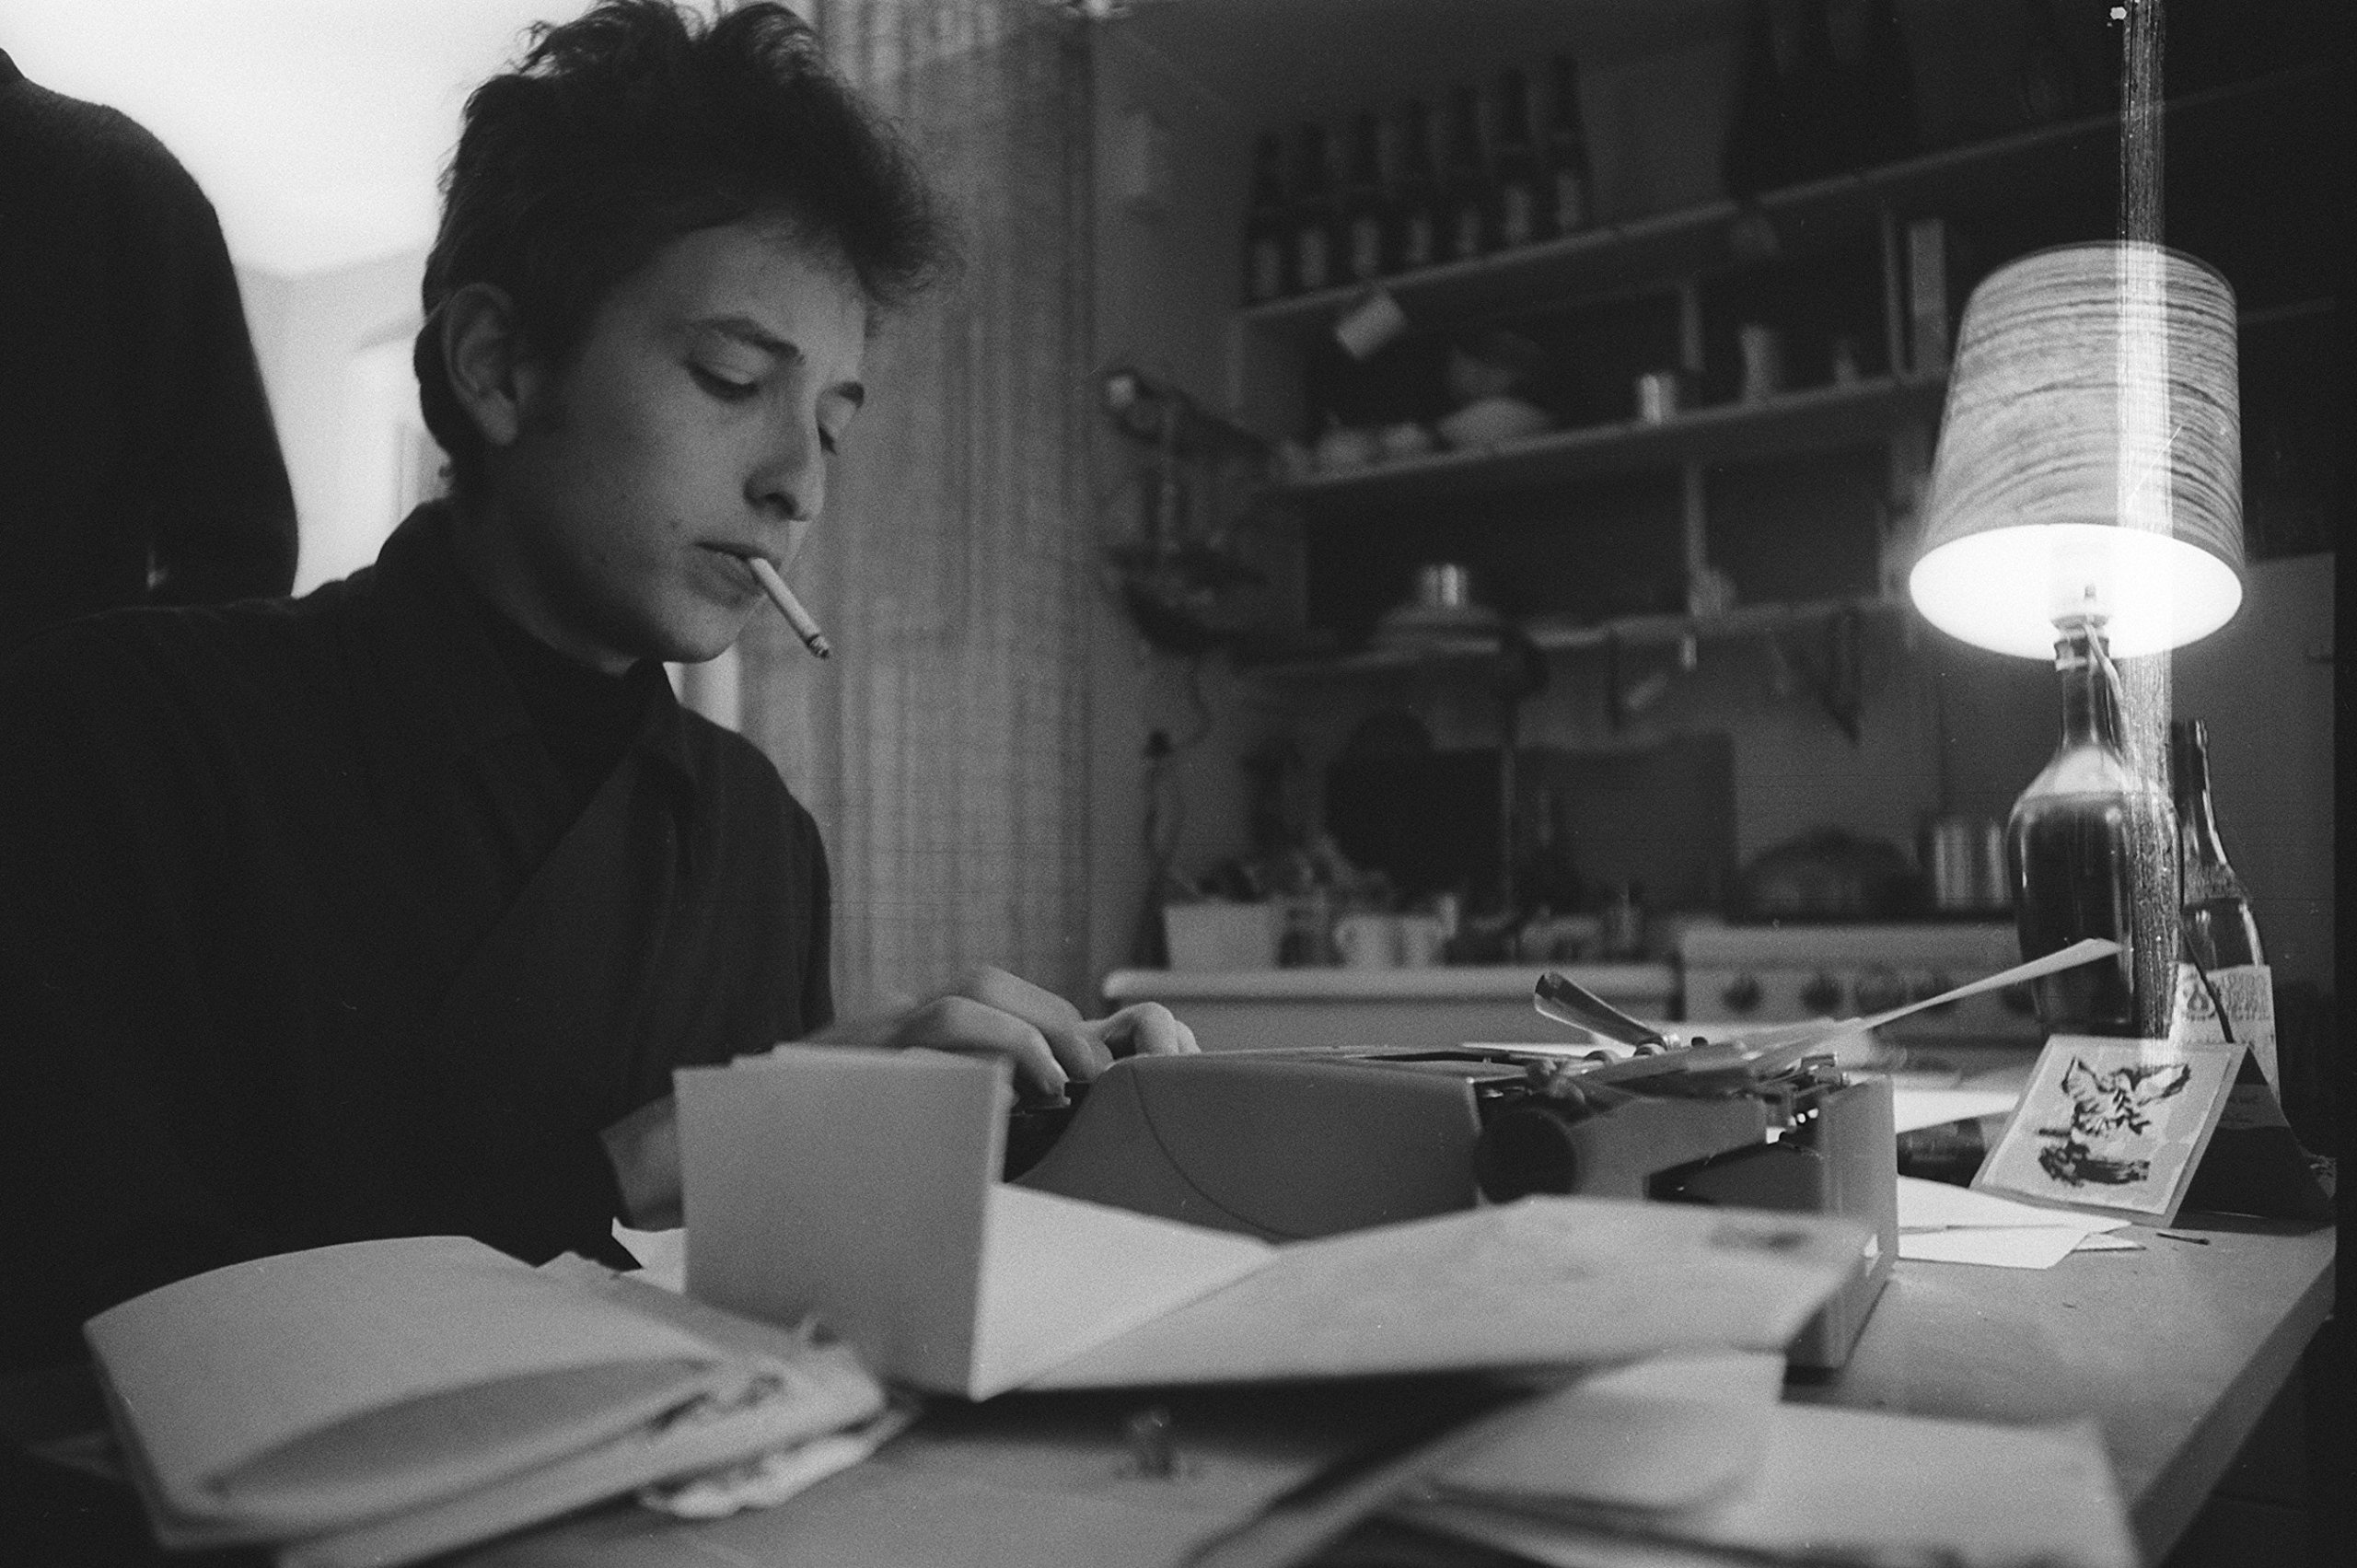 Bob Dylan: "Blowin' in the Wind" (1963) and "The Times They Are a-Changin'" (1964), Anthems for the civil rights. 2560x1710 HD Wallpaper.